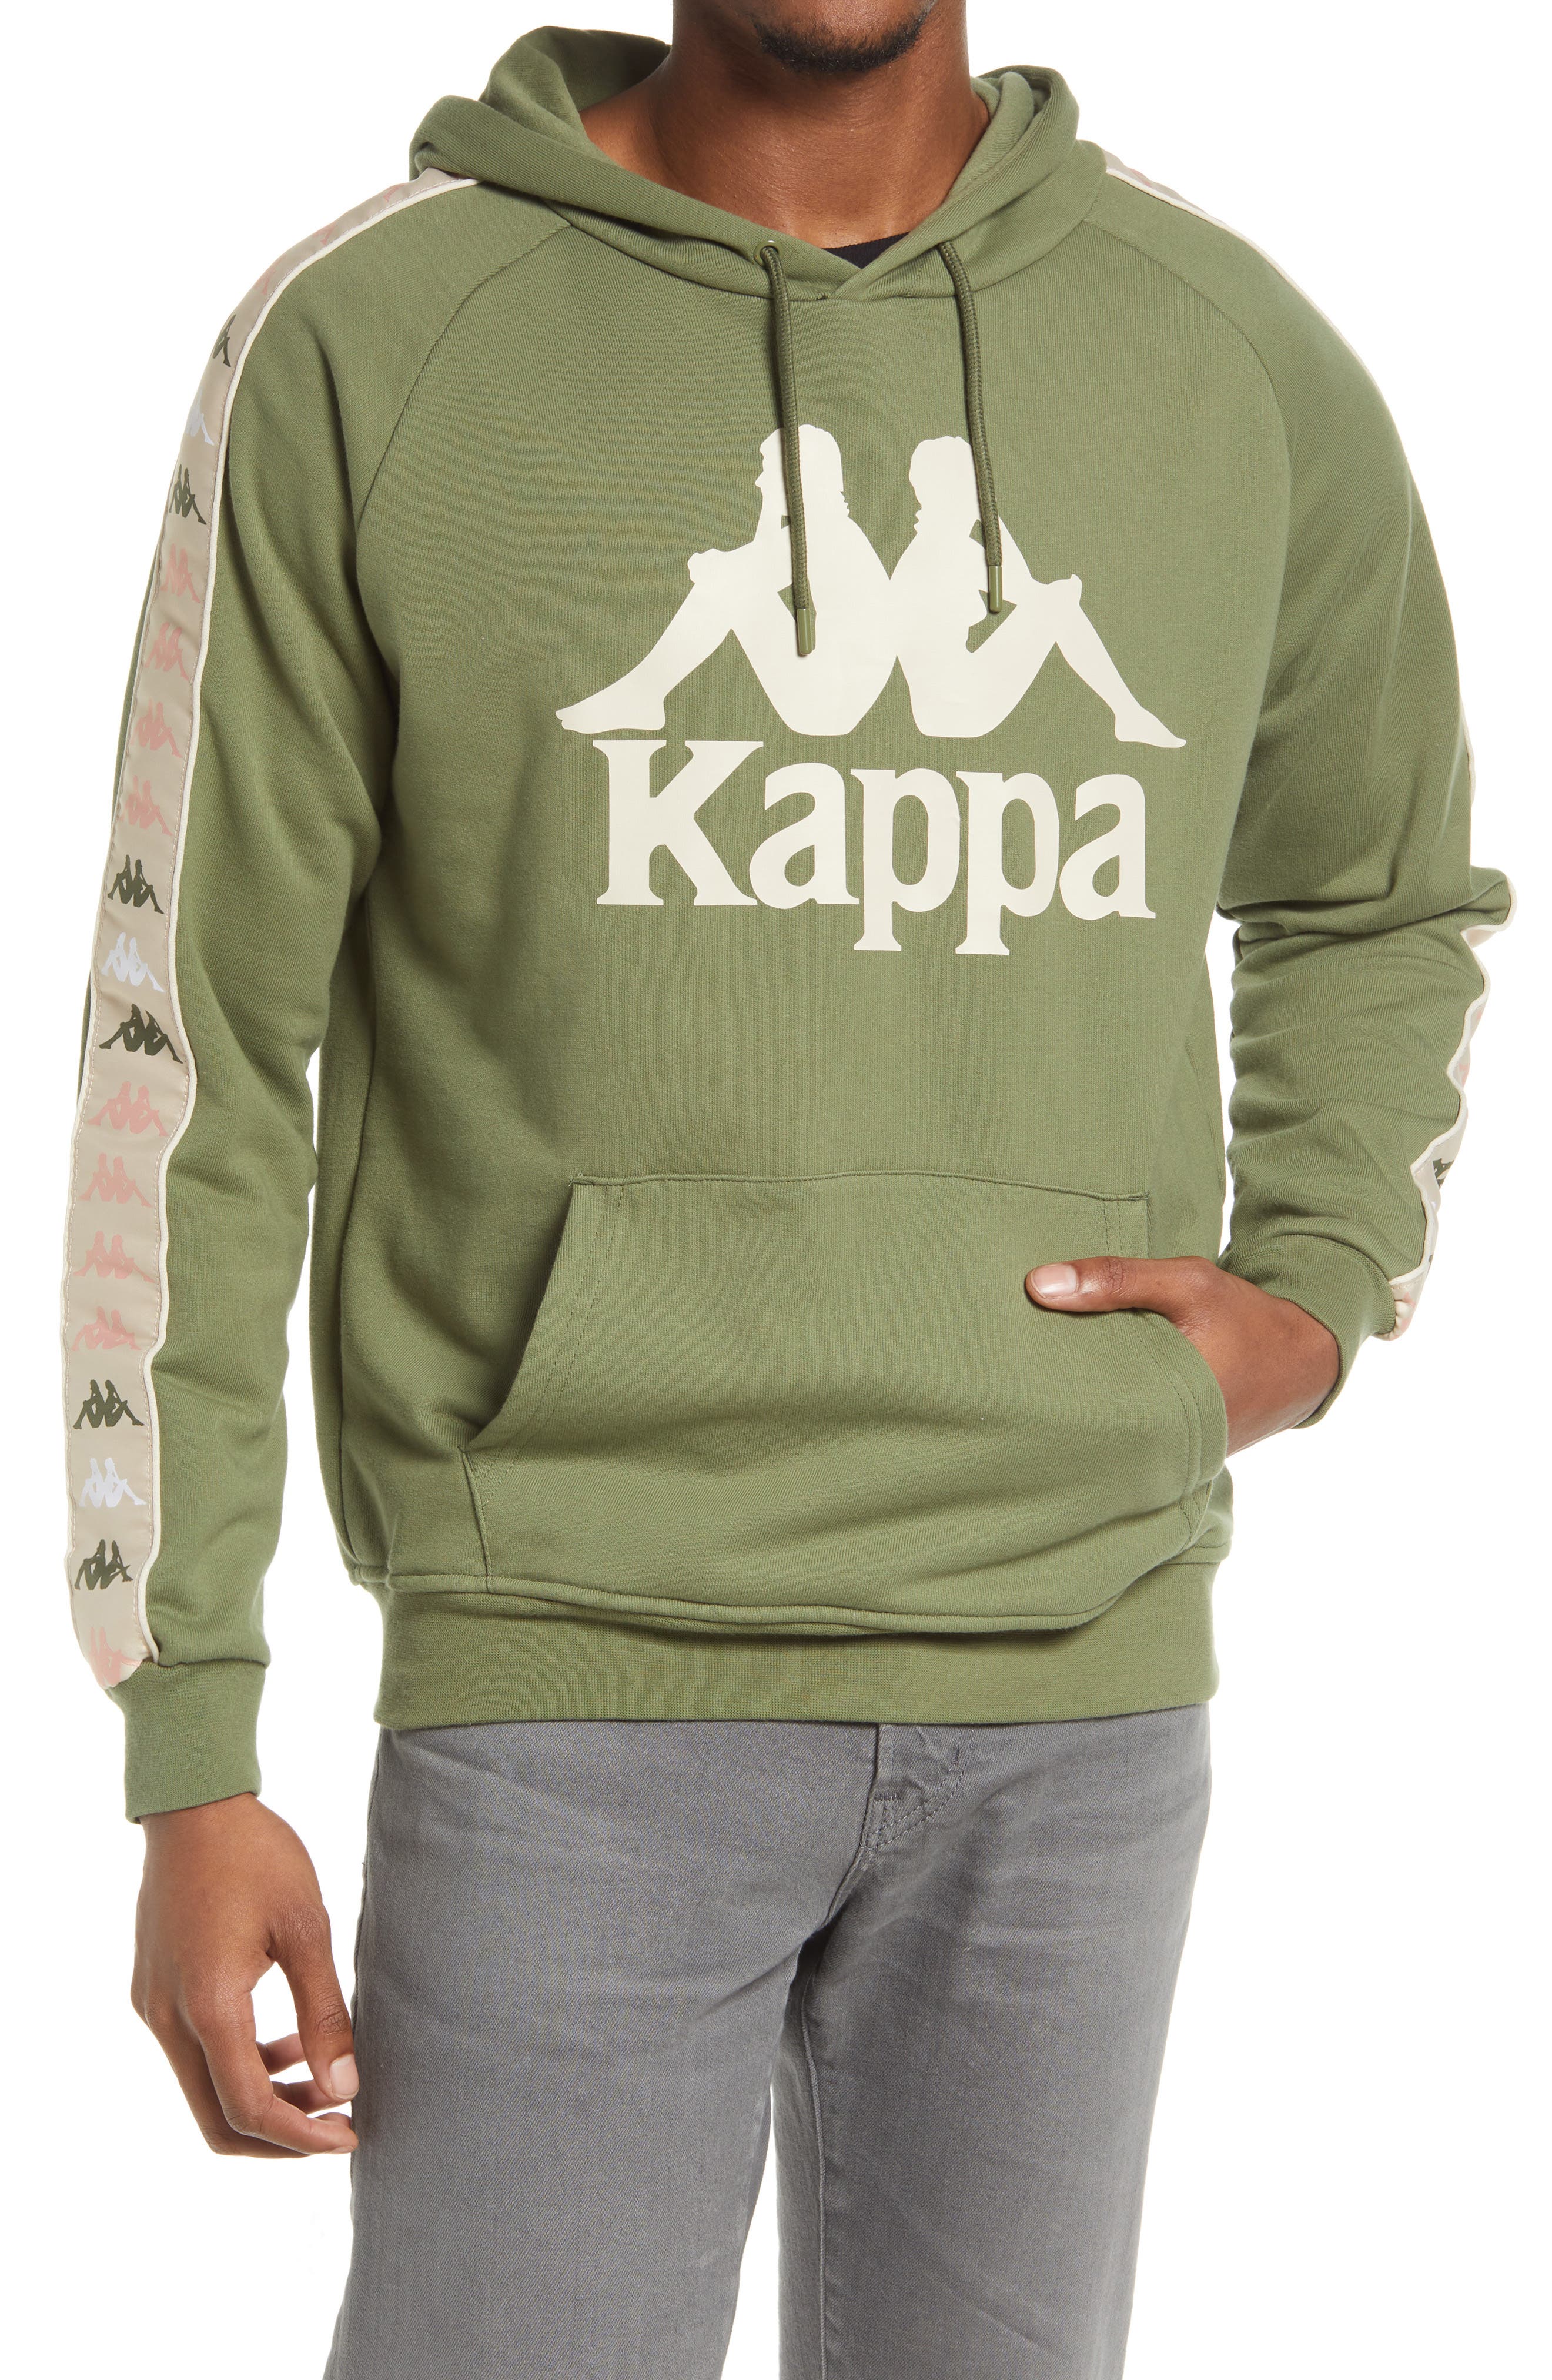 Kappa Men's 222 Banda Hurtado 4 Graphic Hoodie in Green-Beige-Pink Peach-White at Nordstrom, Size Small